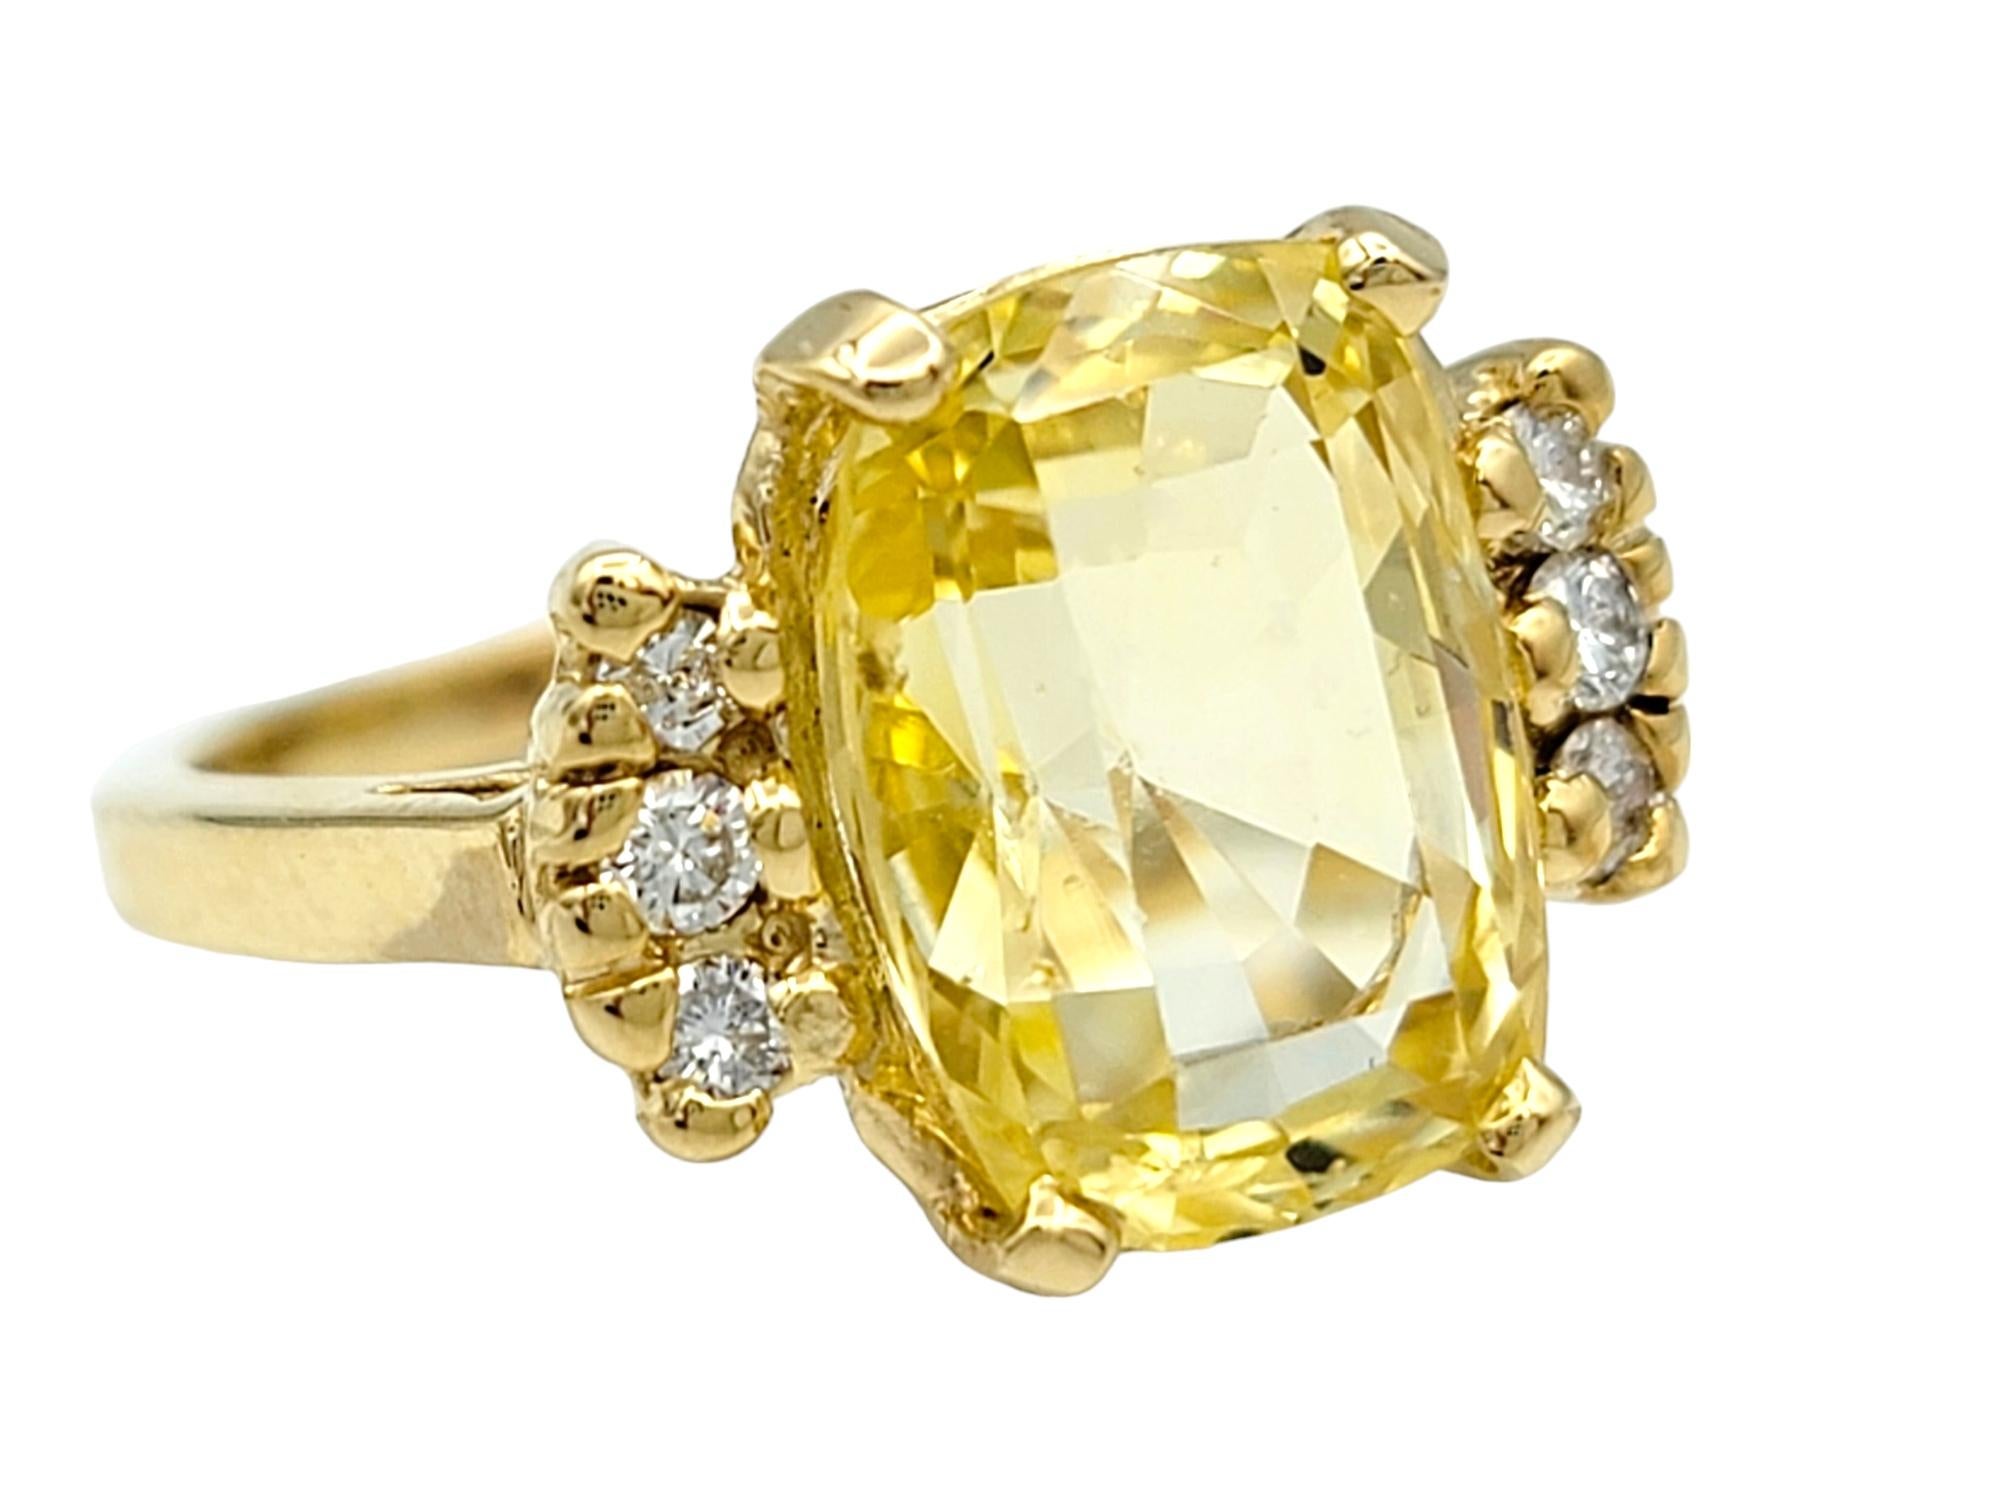 Ring Size: 5.25

Embrace the warmth and radiance of this cushion cut yellow sapphire ring, a true embodiment of elegance in polished yellow gold. The cushion-cut yellow sapphire, resplendent in its sunny hue, sits majestically as the centerpiece,